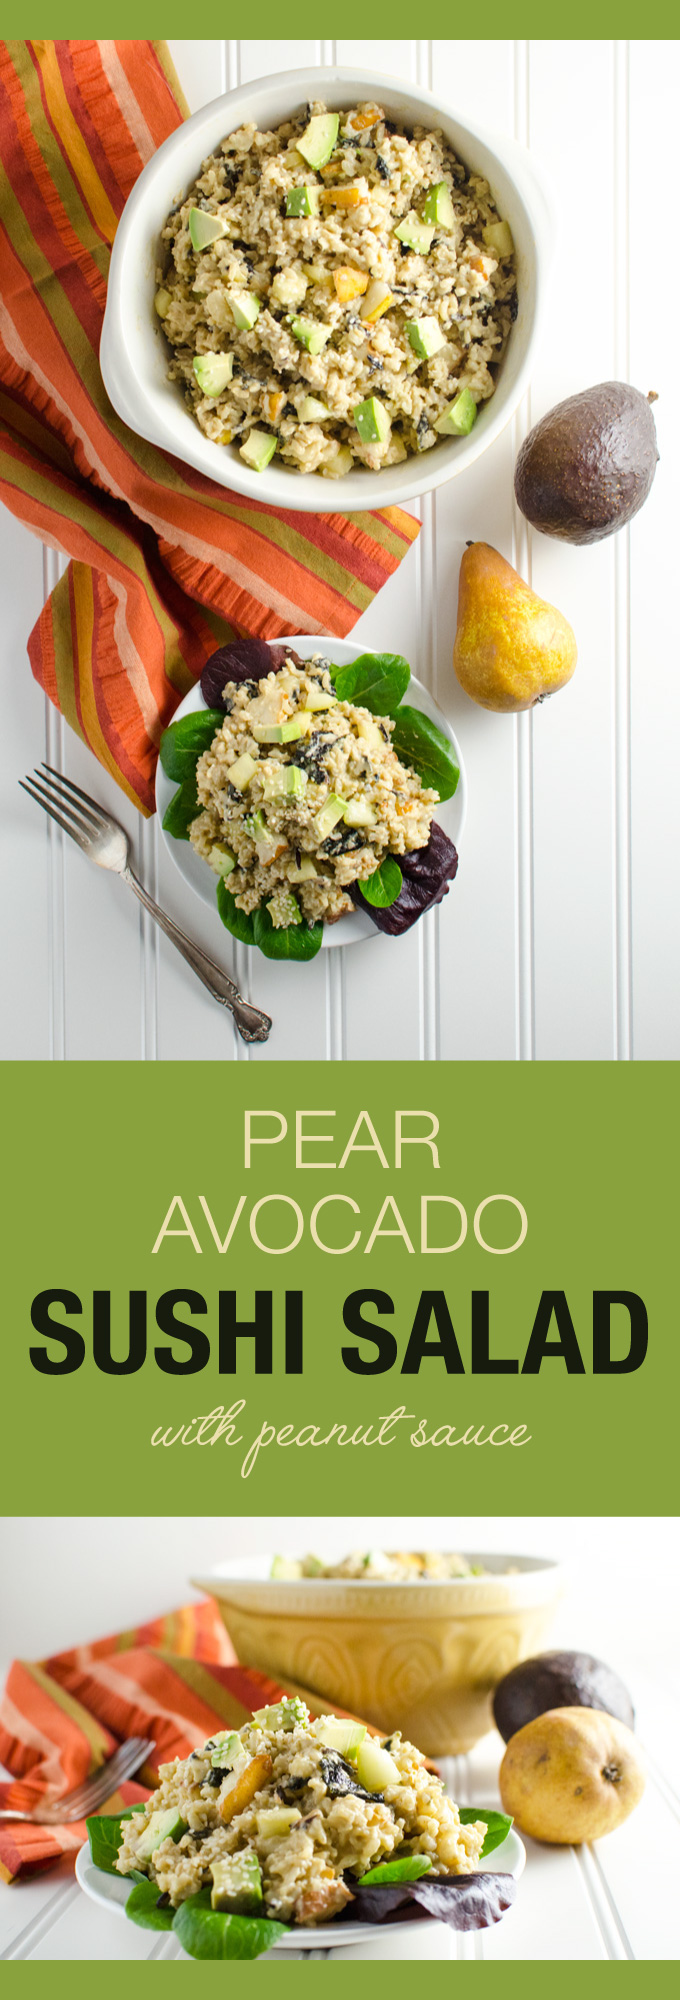 Pear Avocado Sushi Salad with Peanut Sauce - this simple vegan and gluten-free recipe is the perfect compromise when you don't feel like rolling sushi. Enjoy the taste without the work | VeggiePrimer.com